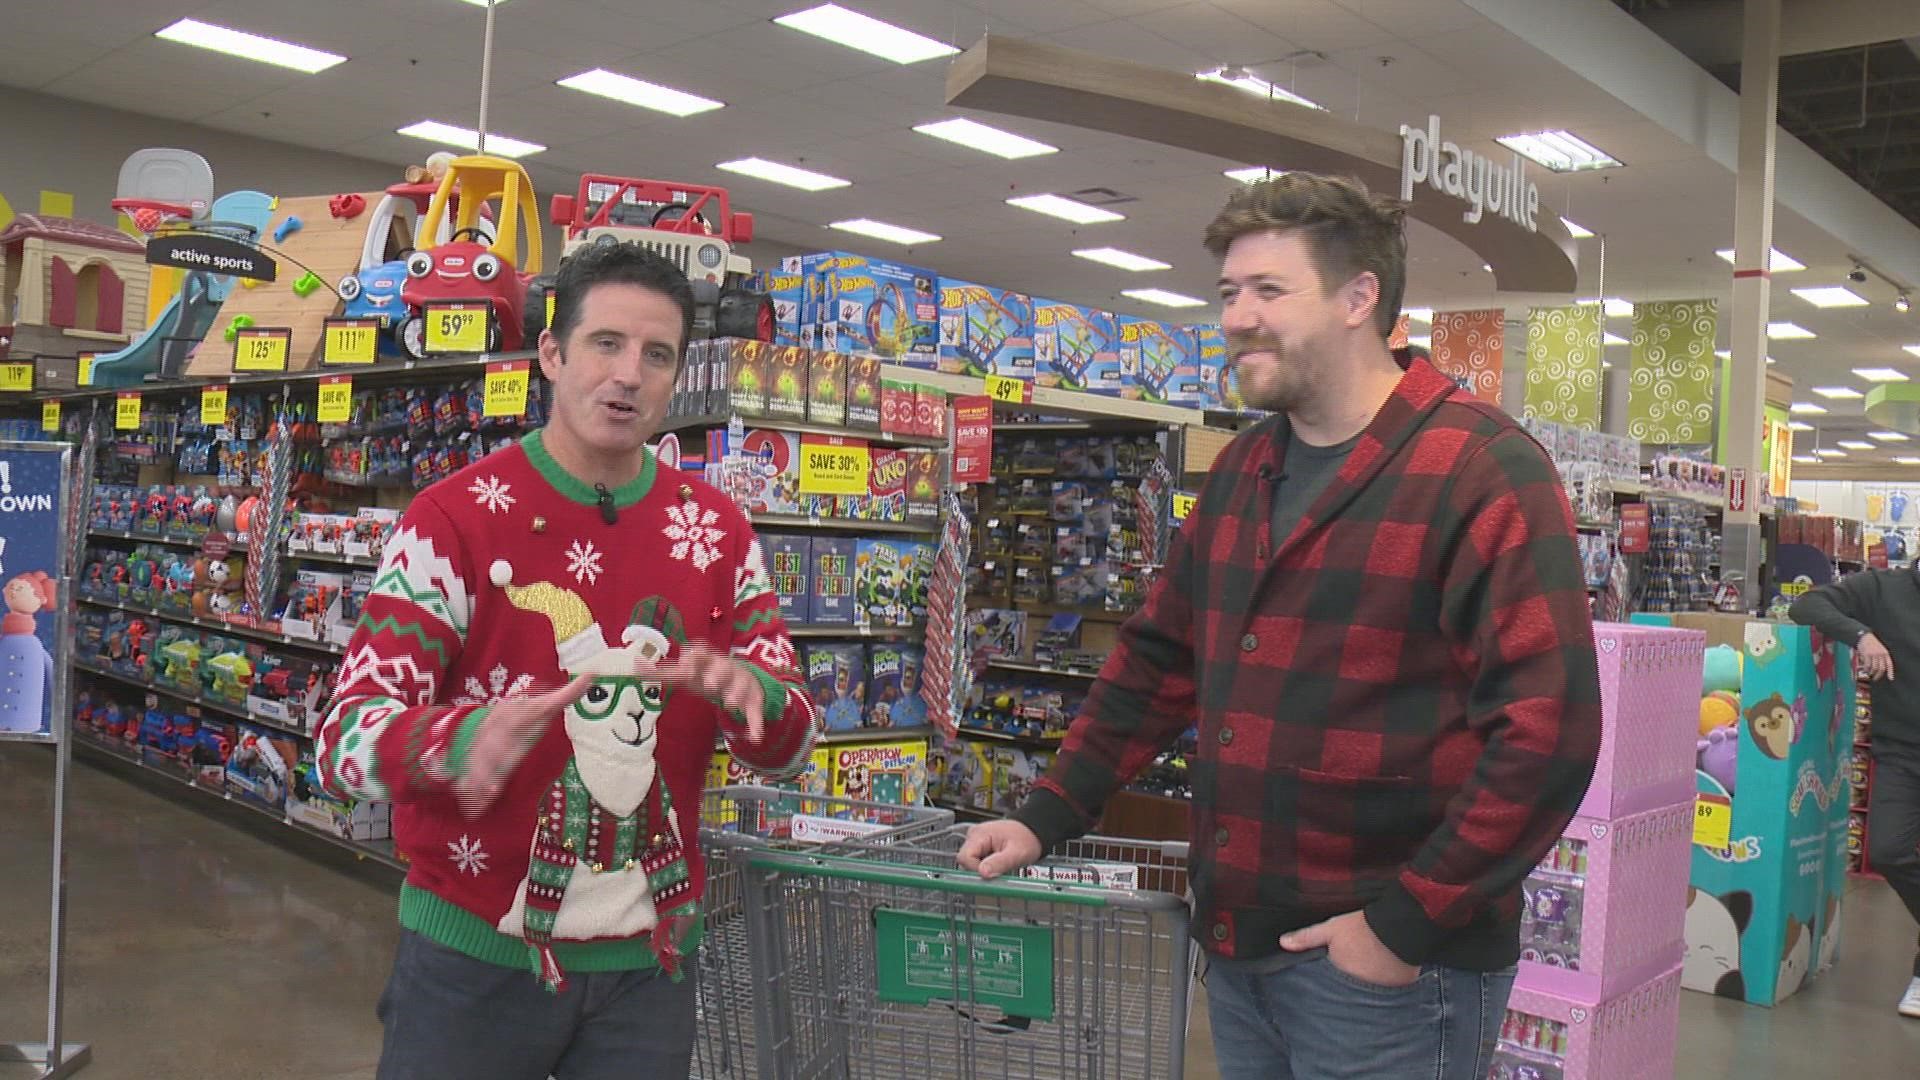 The KGW Great Toy Drive helps nonprofits distribute toys to kids and teens across the area. To kick things off, some KGW anchors faced off in a fun competition.